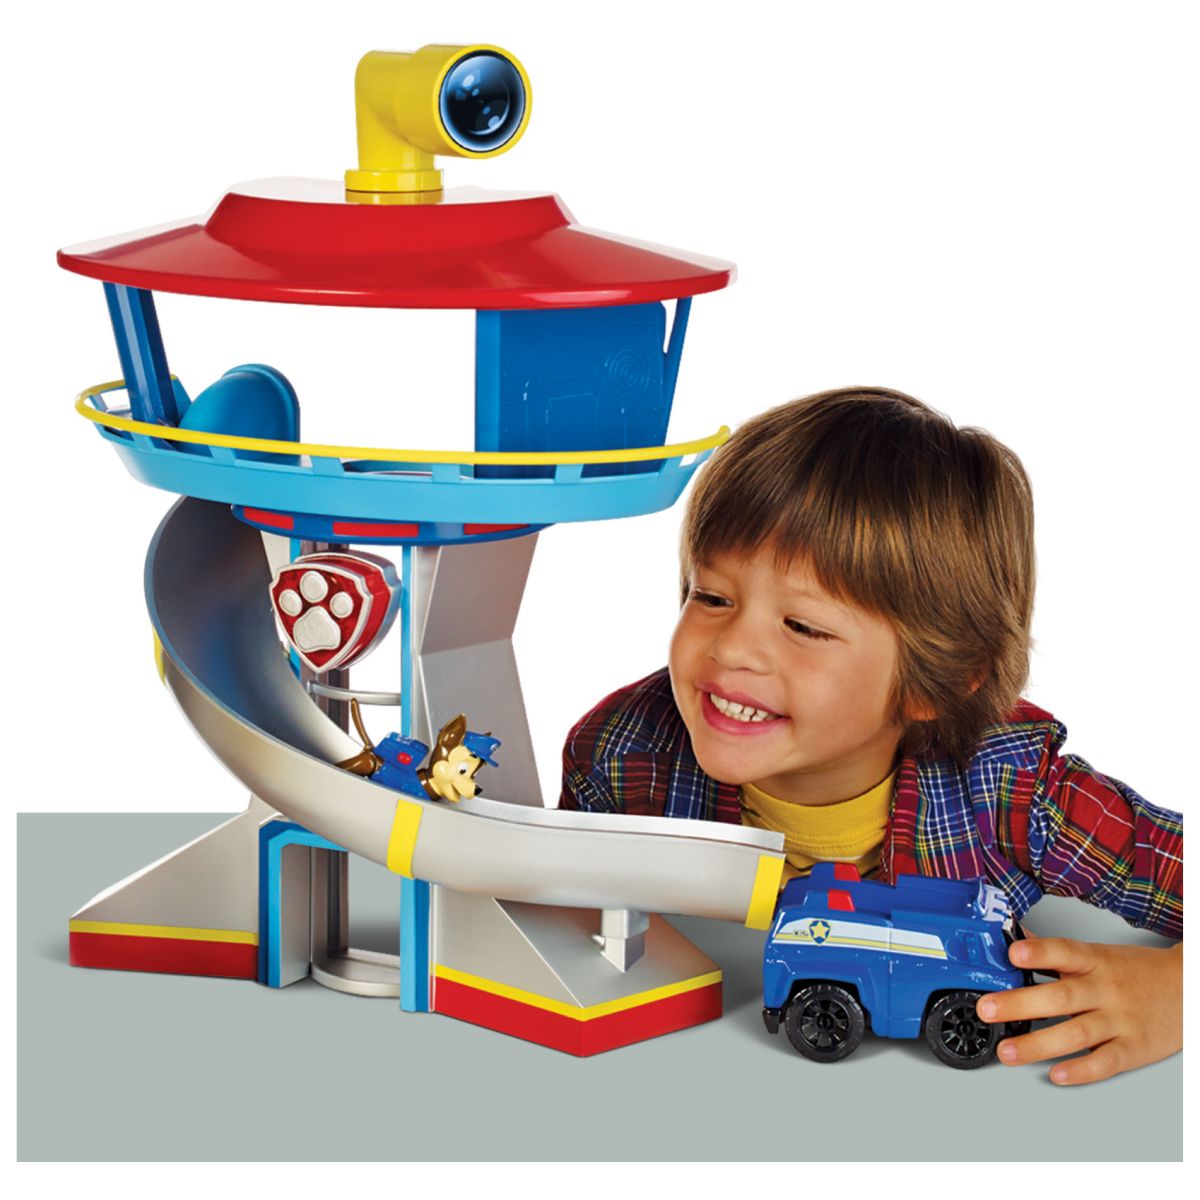 Lookout Playset